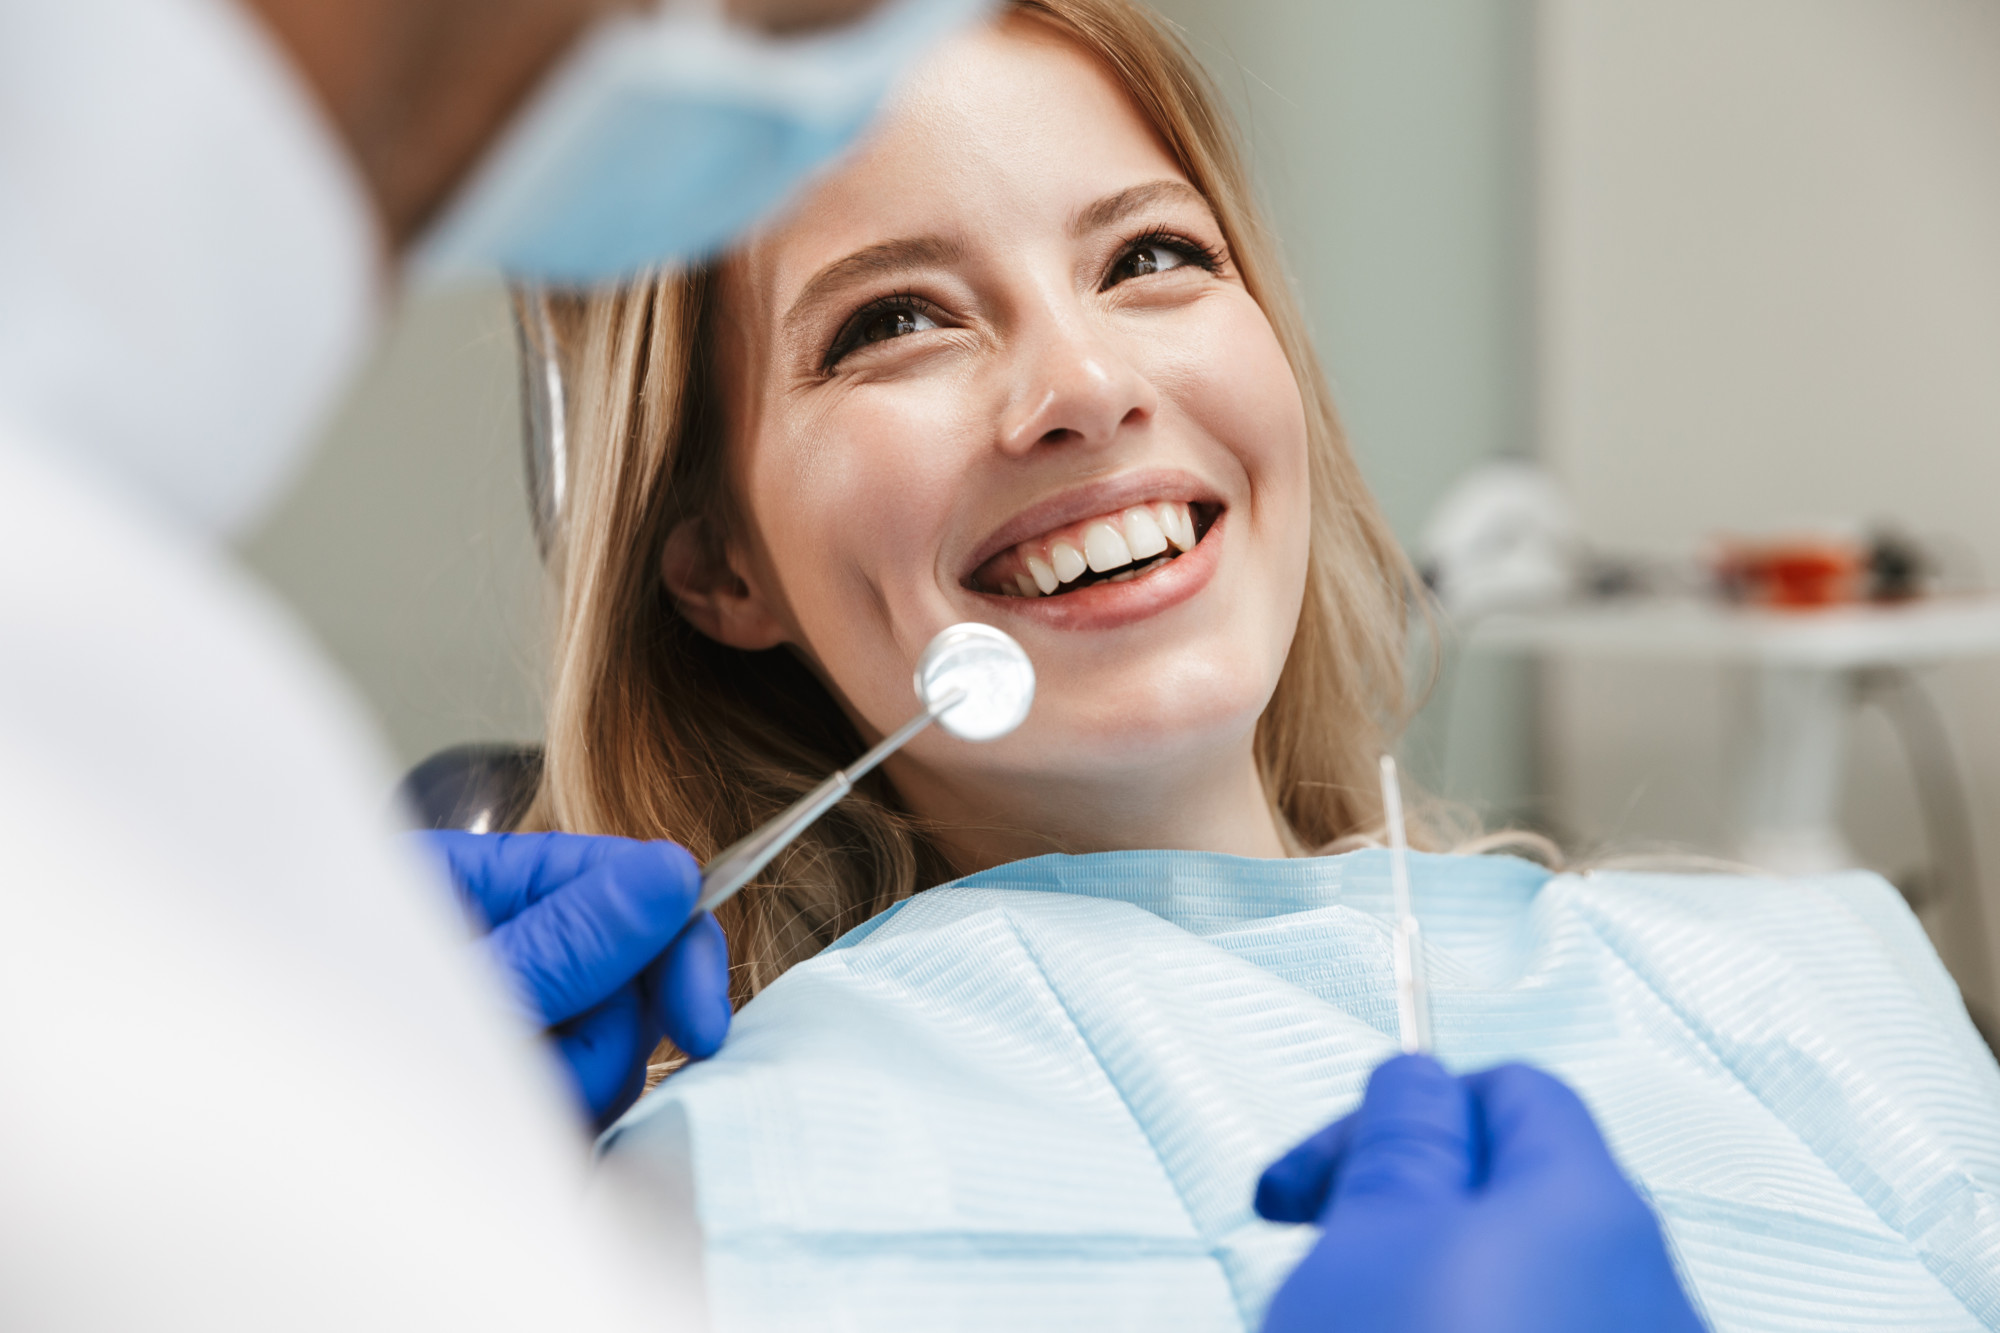 What Is the Best Material for Dental Fillings?